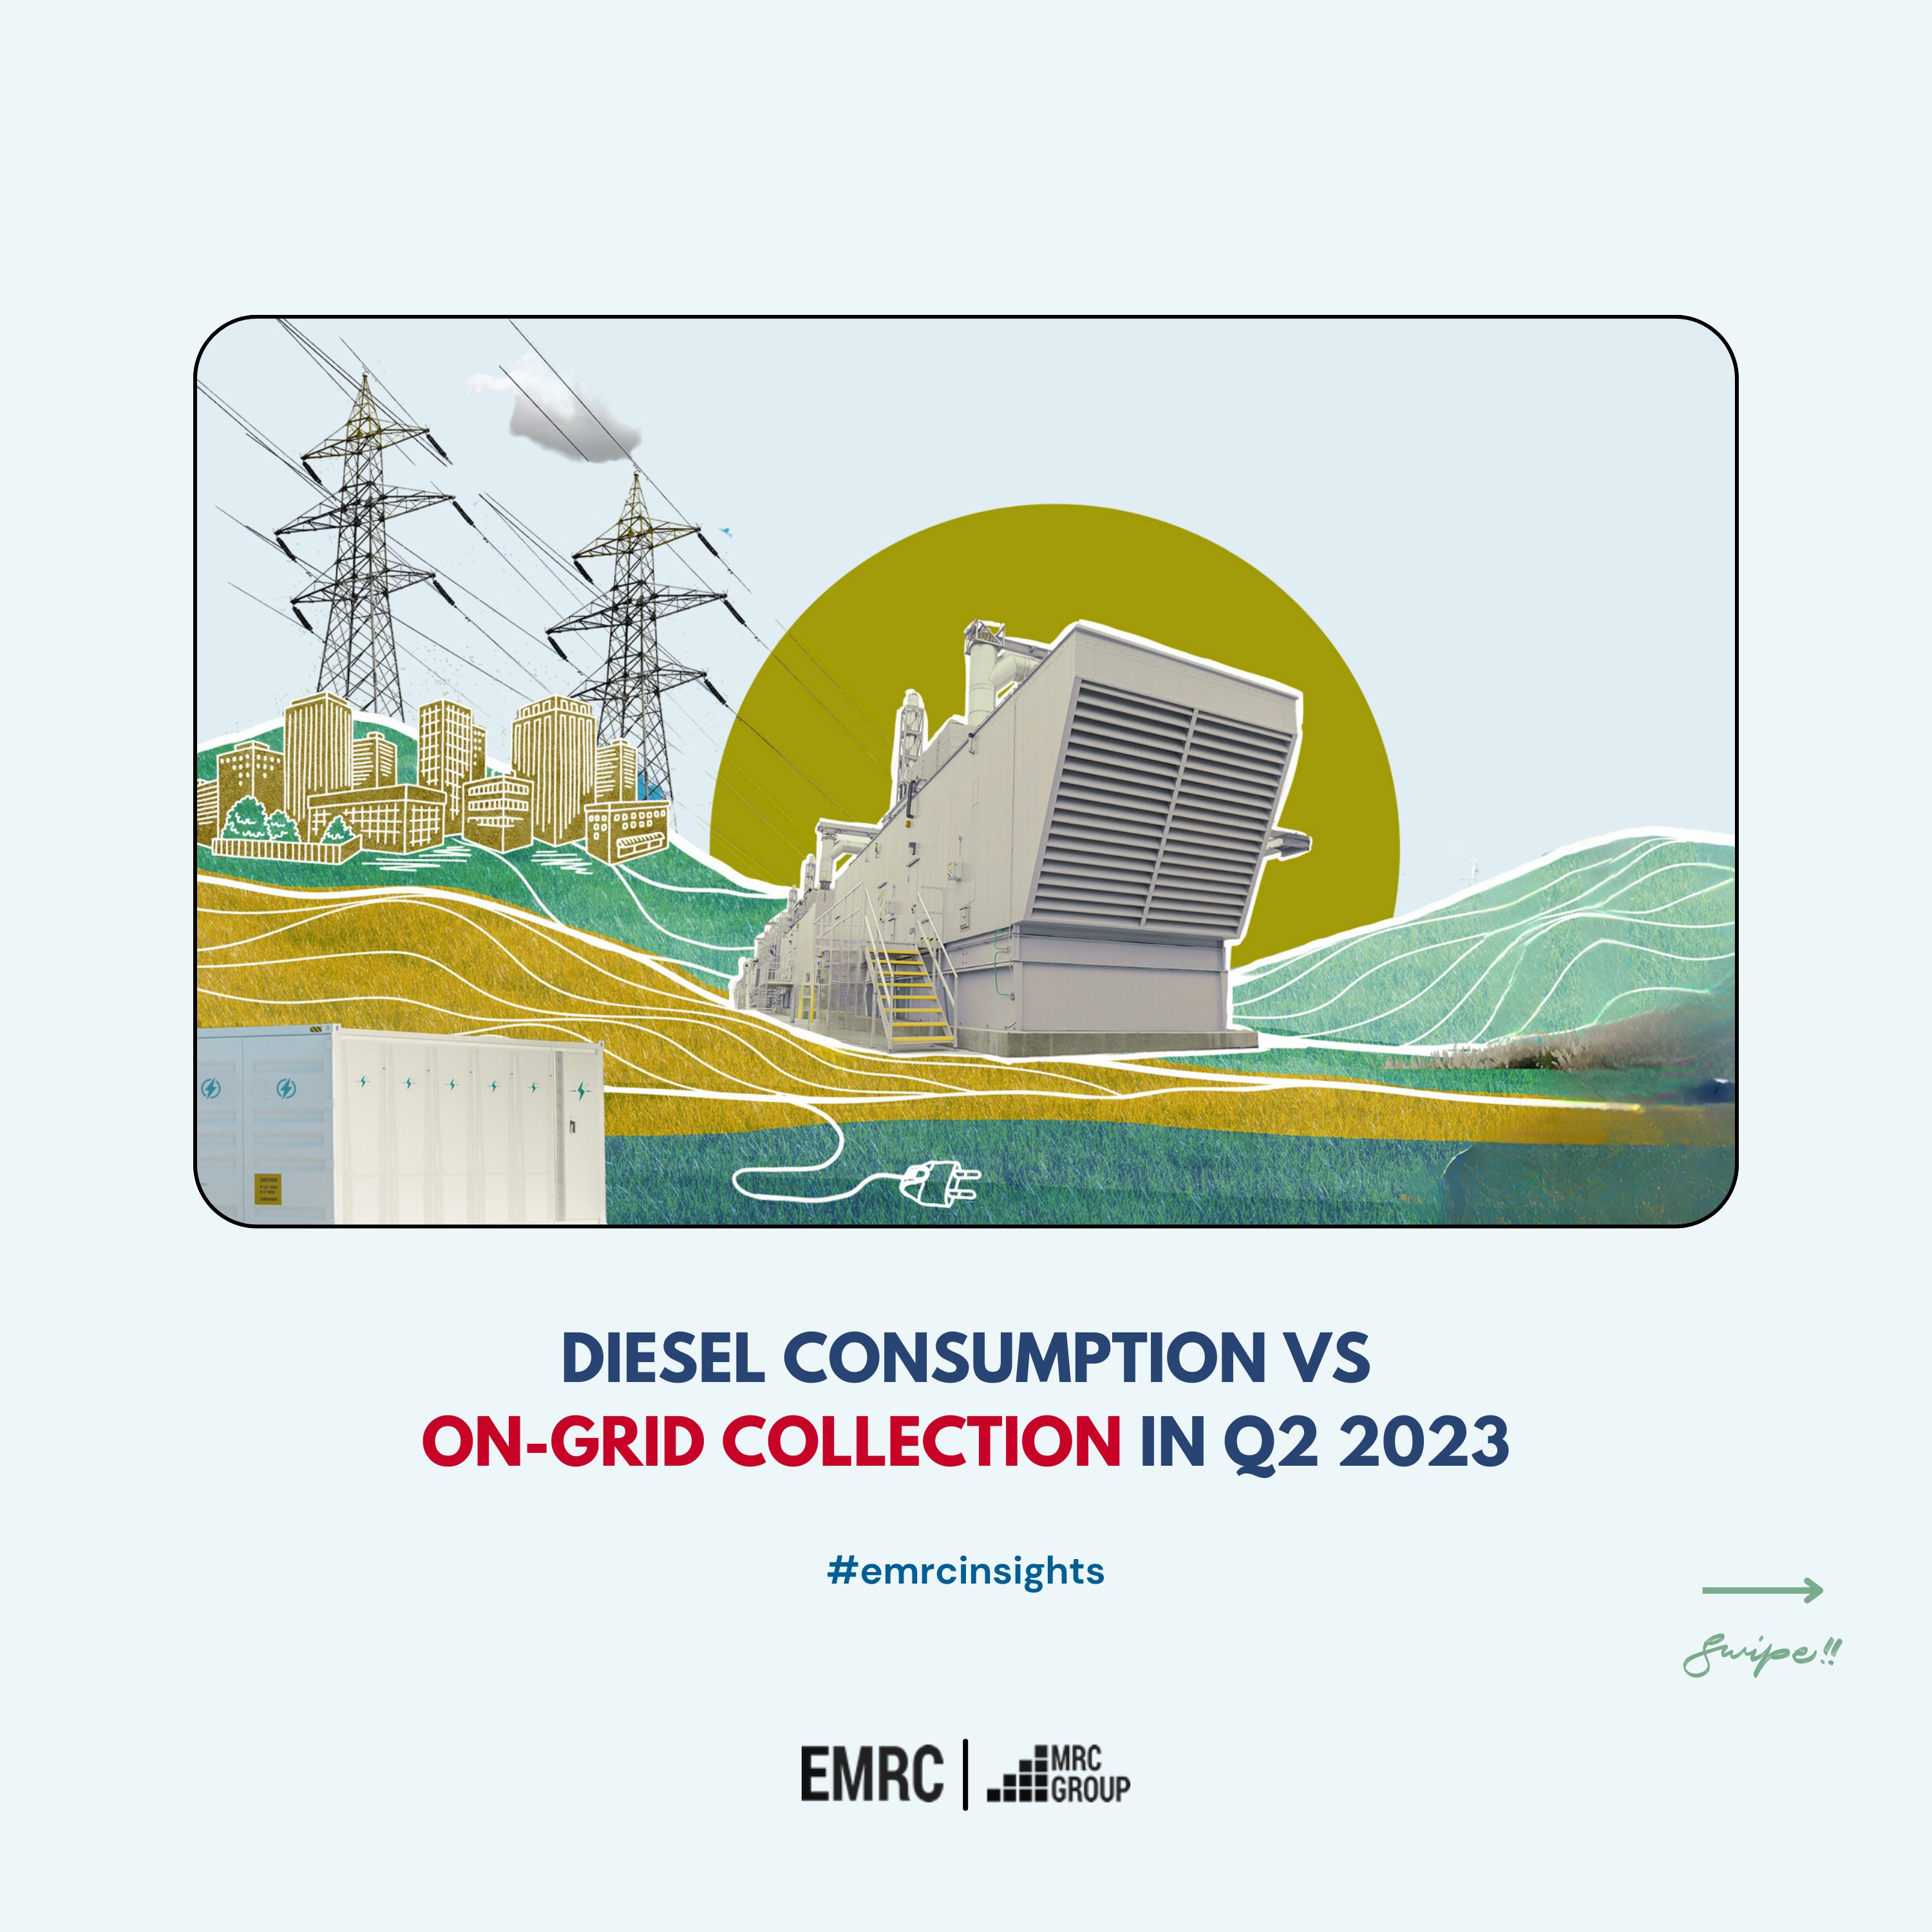 Diesel Consumption Vs On-Grid Collection in Q2 2023